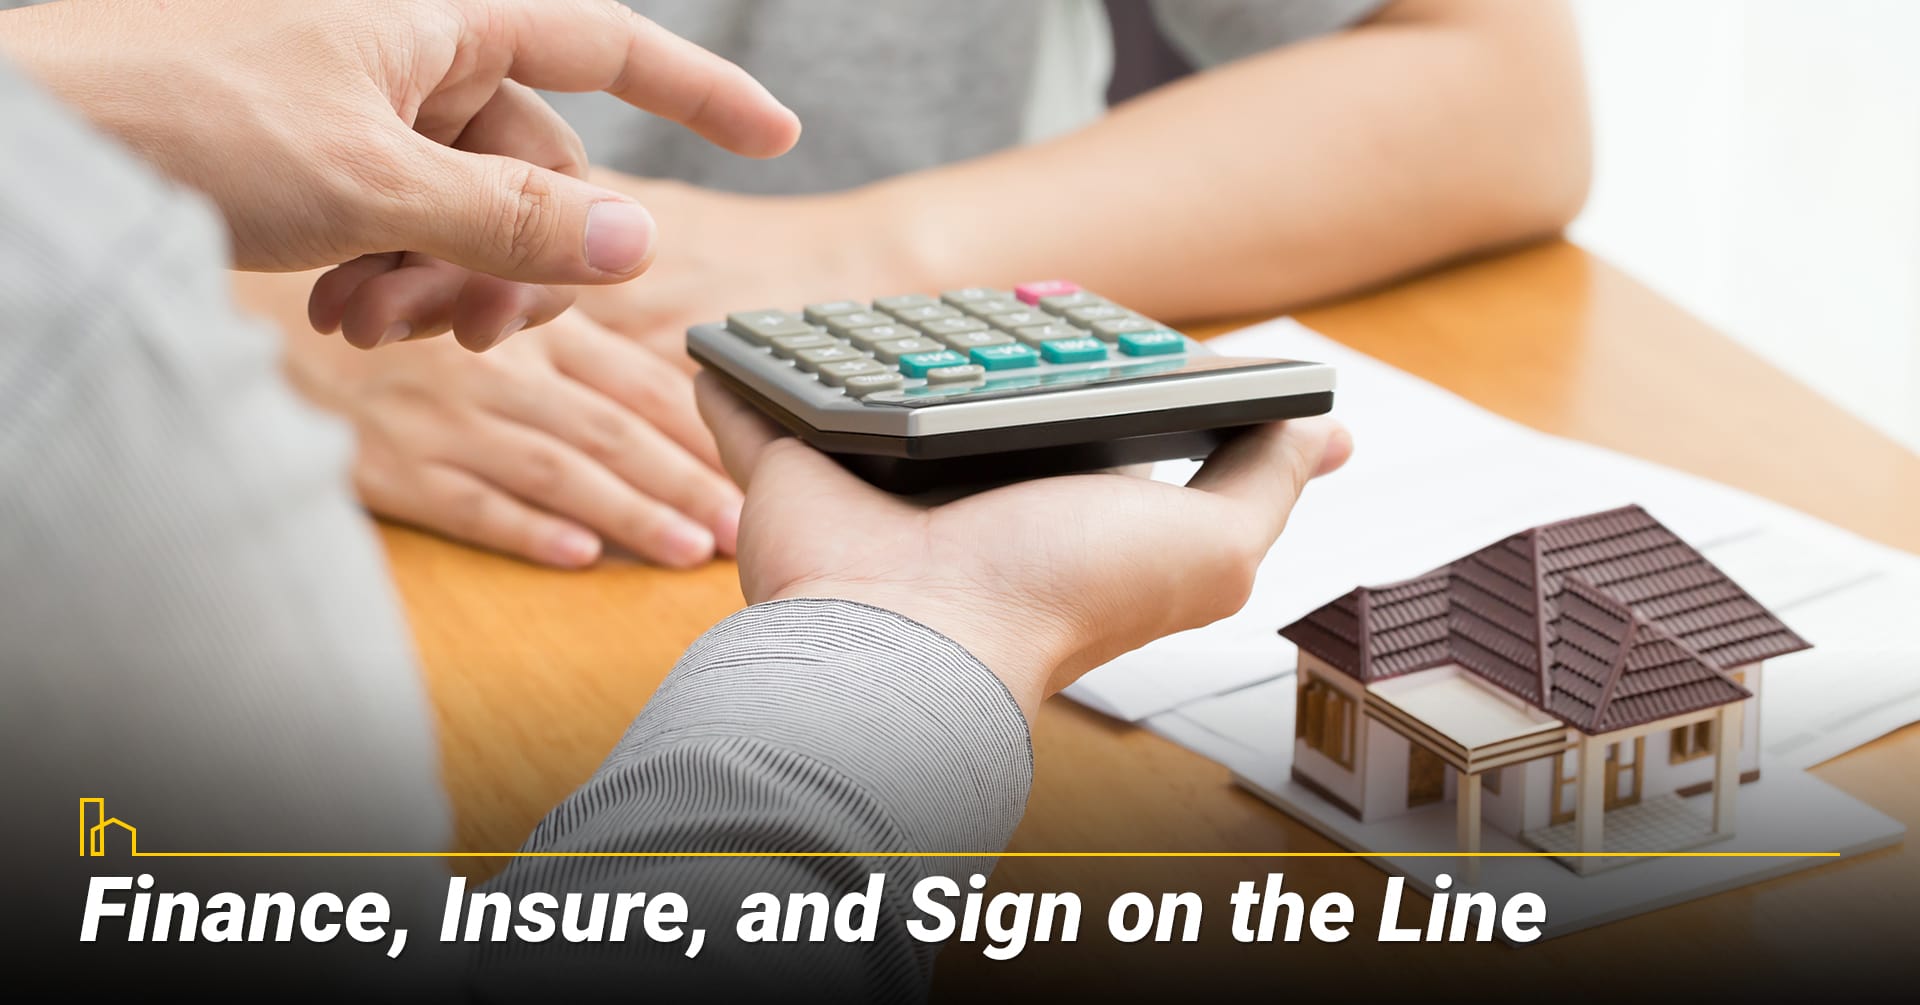 Finance, Insure and Sign on the Line, get through the final steps